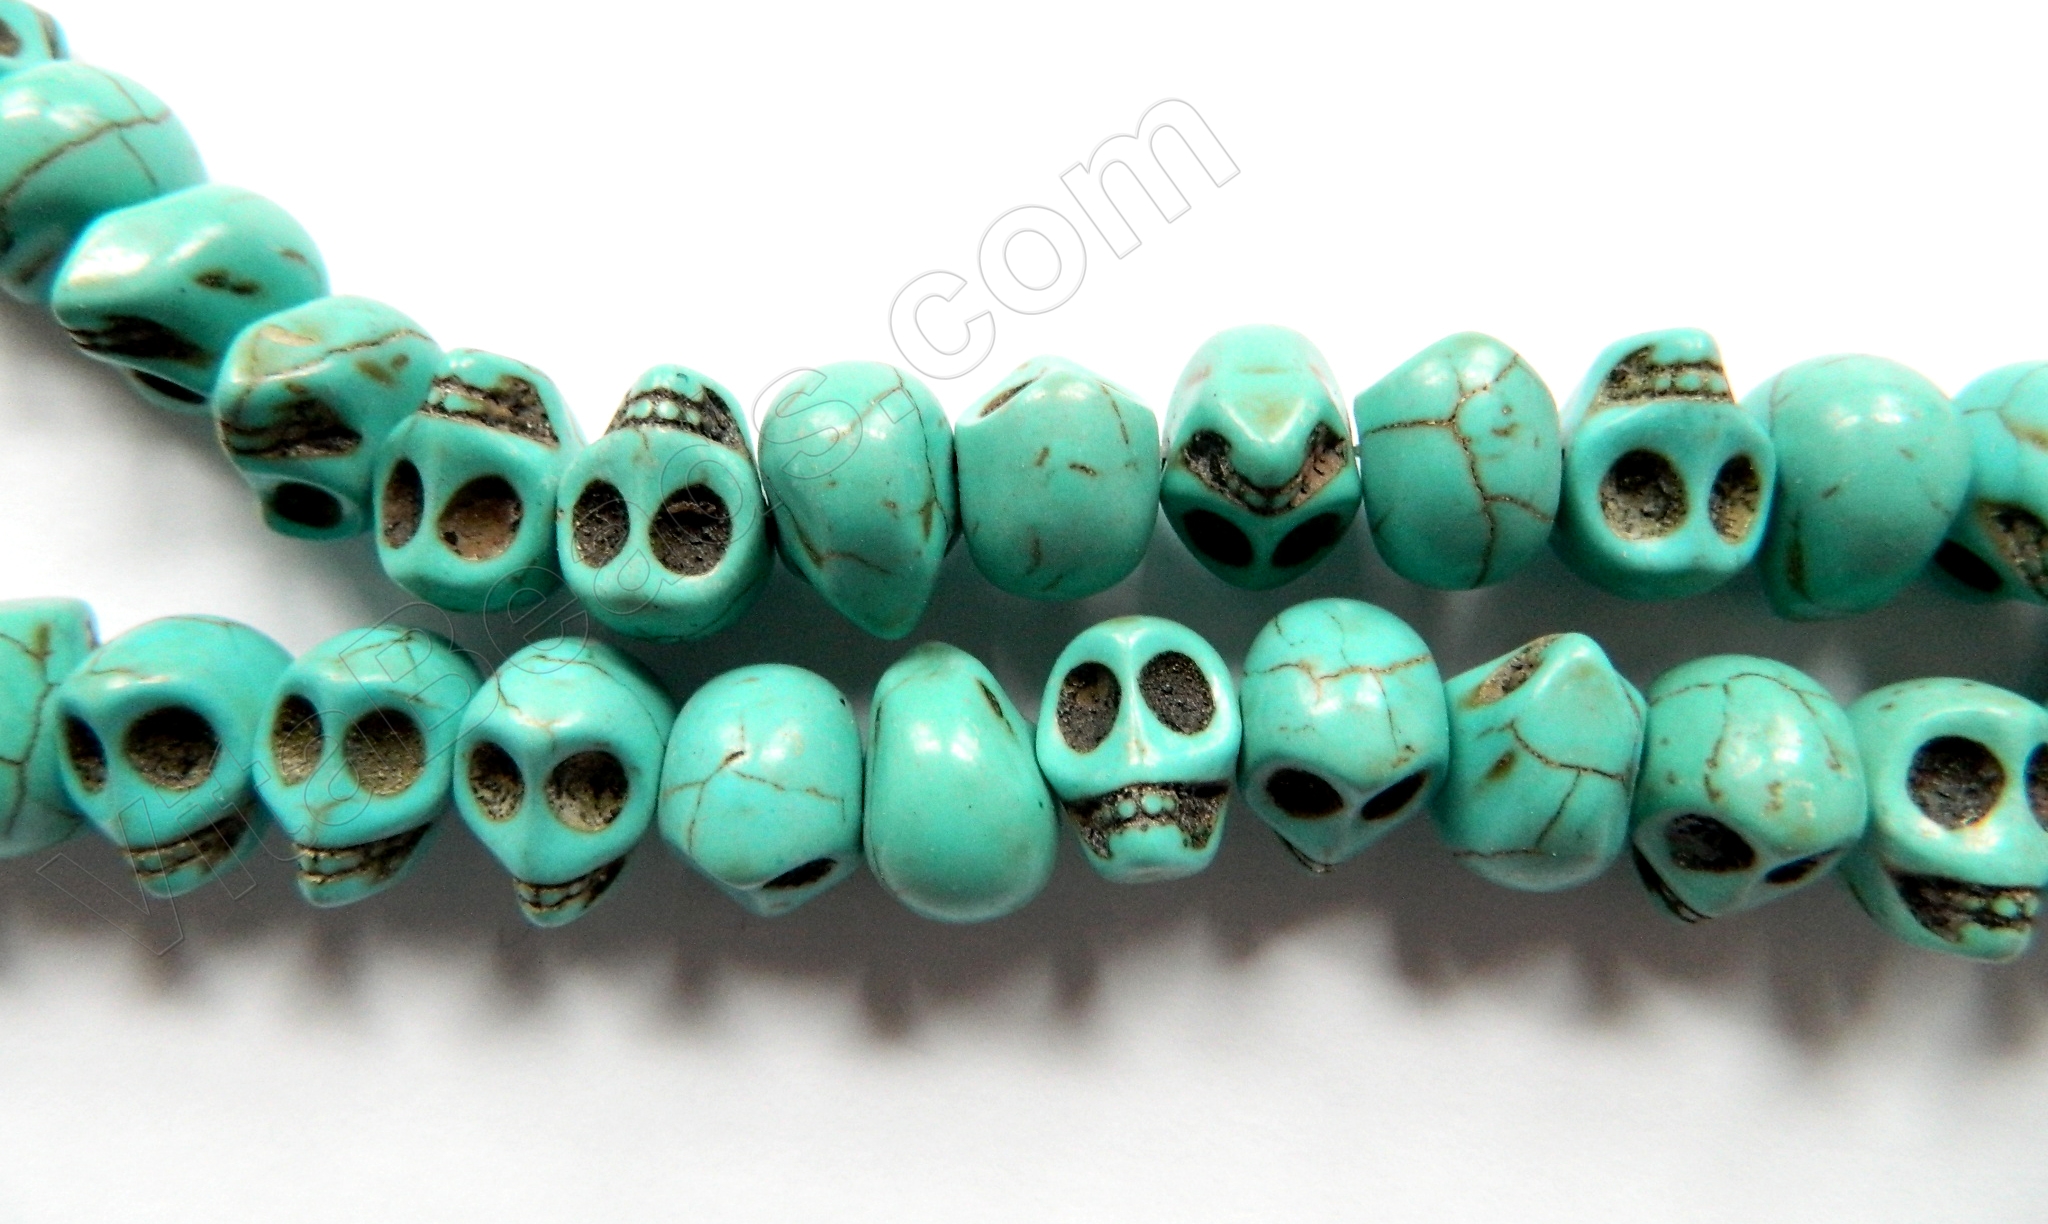 Wholesale 30pcs Turquoise Carved Skull Beads 12X10MM 10colour 